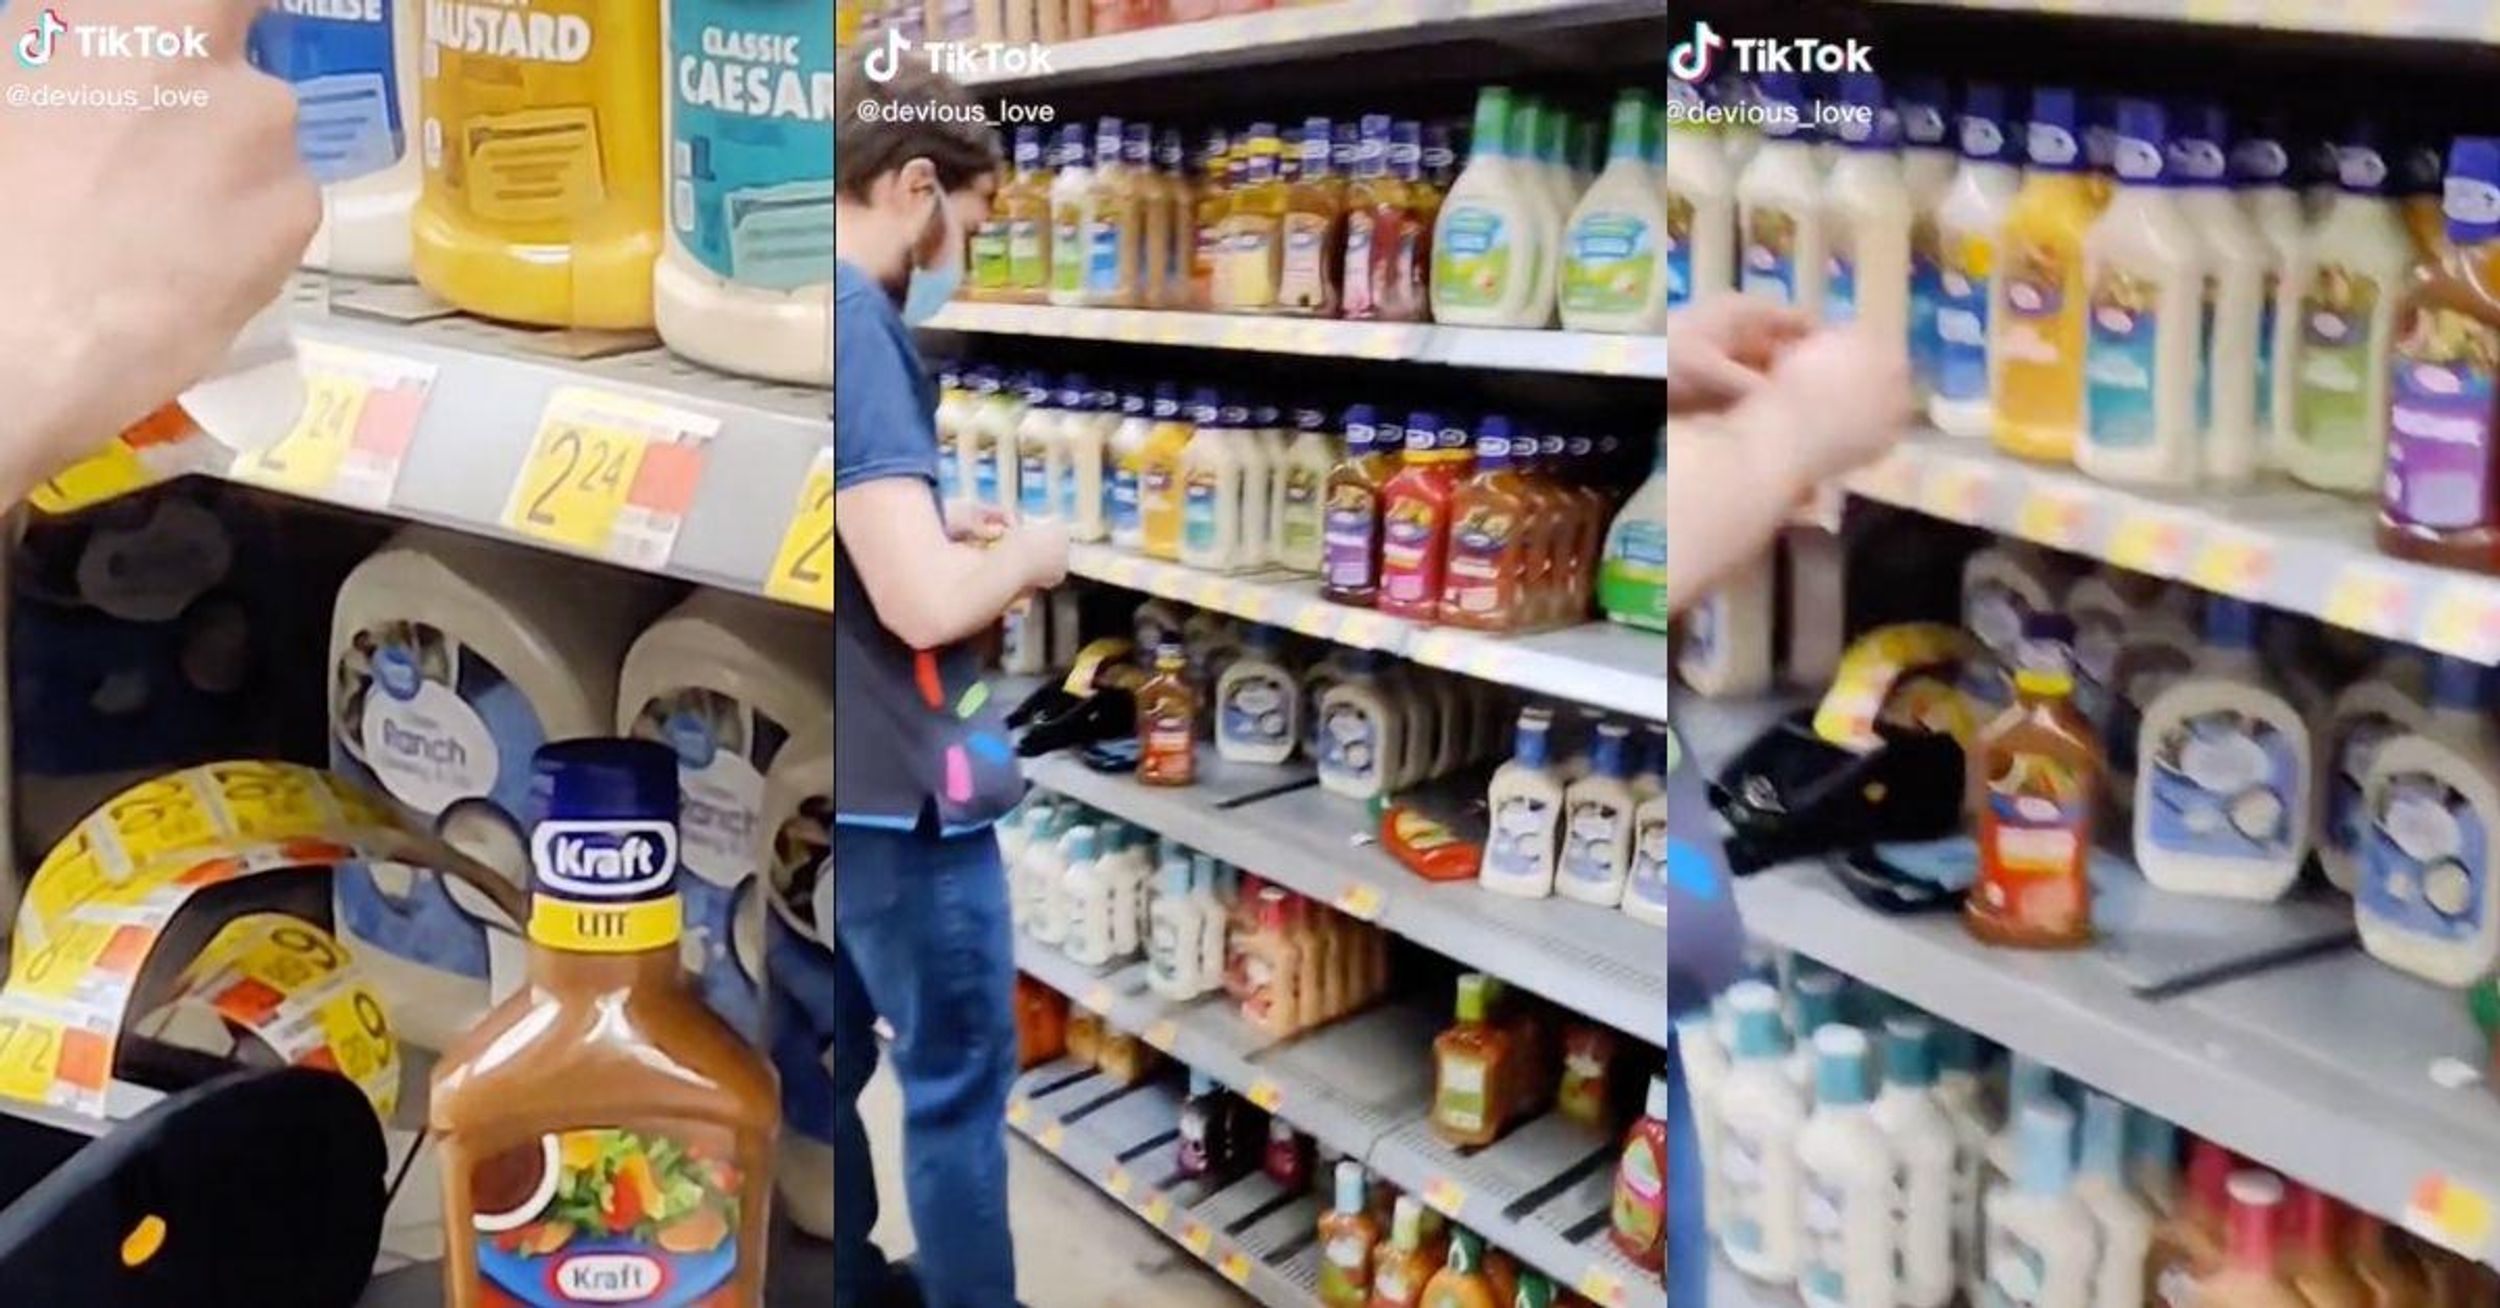 Video Of Walmart Worker Swapping Out Salad Dressing Price Tags With 350% Increase Sparks Outrage